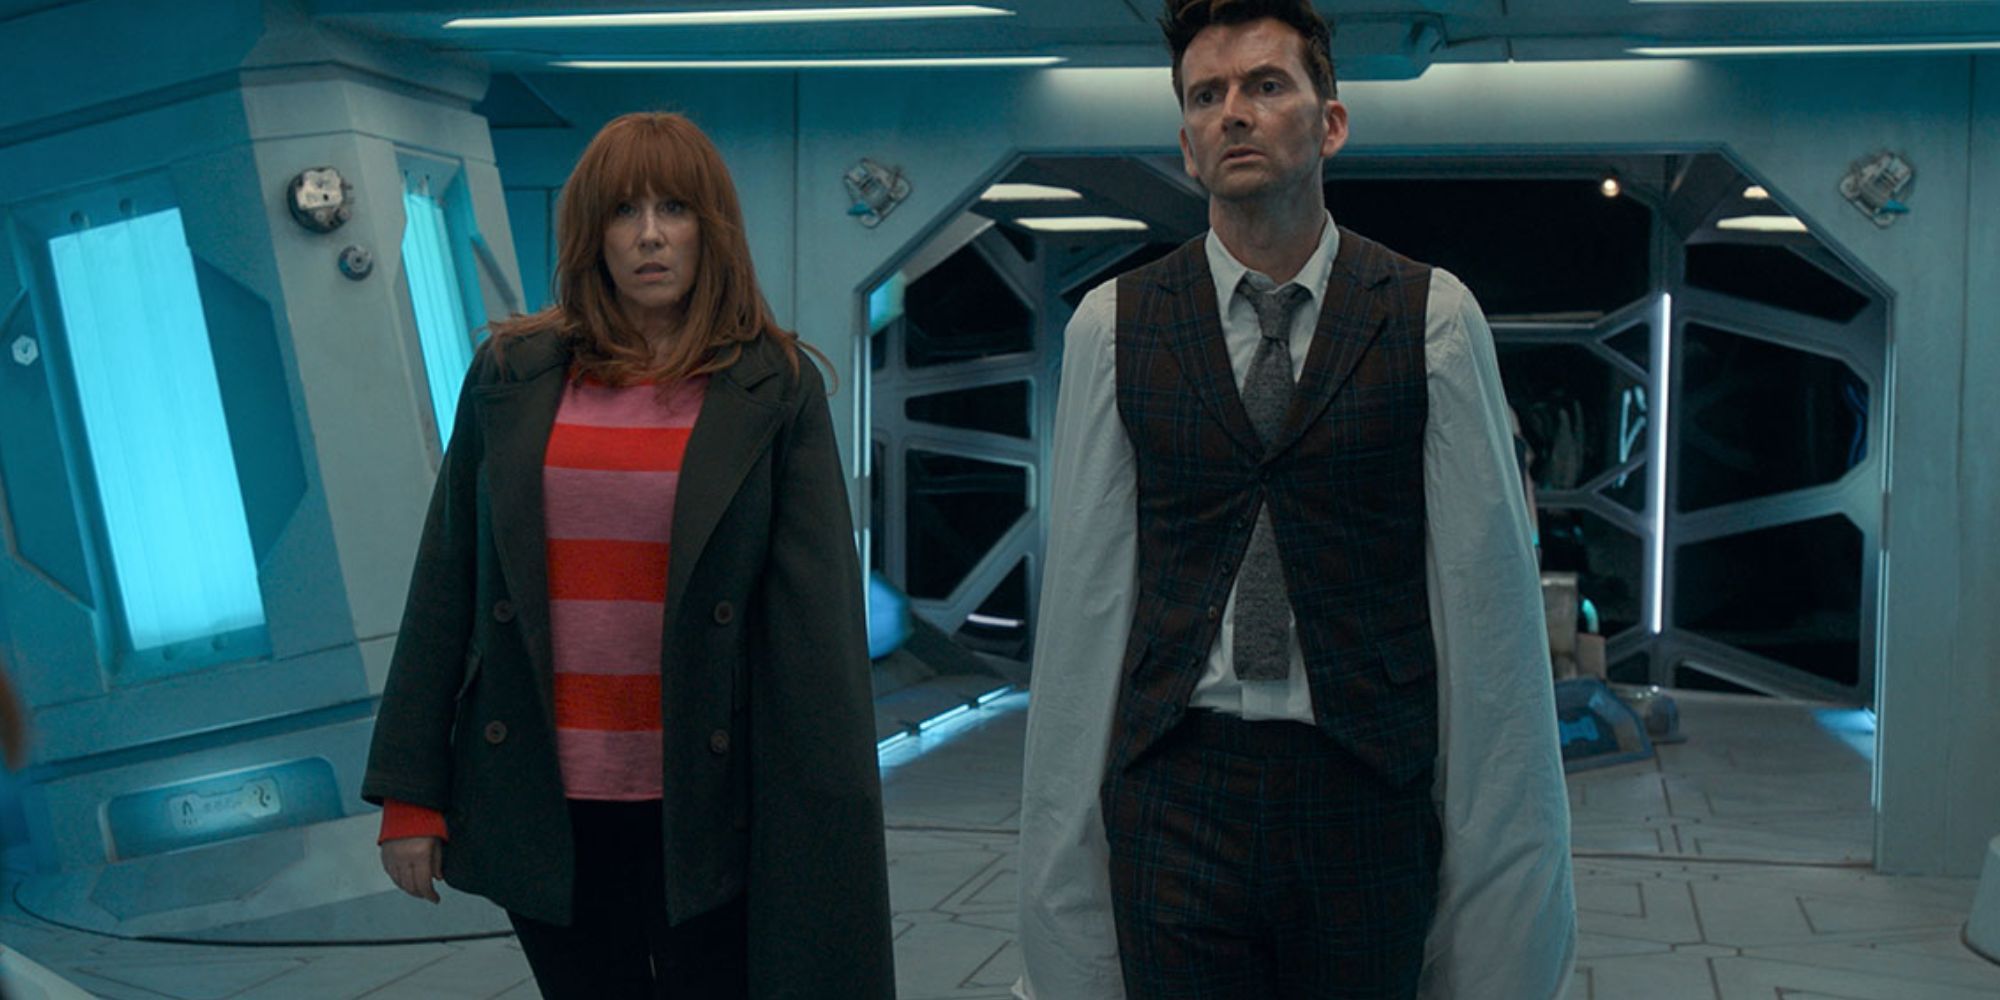 Catherine Tate and David Tennant as Not-Things pretending to be Donna Noble and the Fourteenth Doctor in Doctor Who